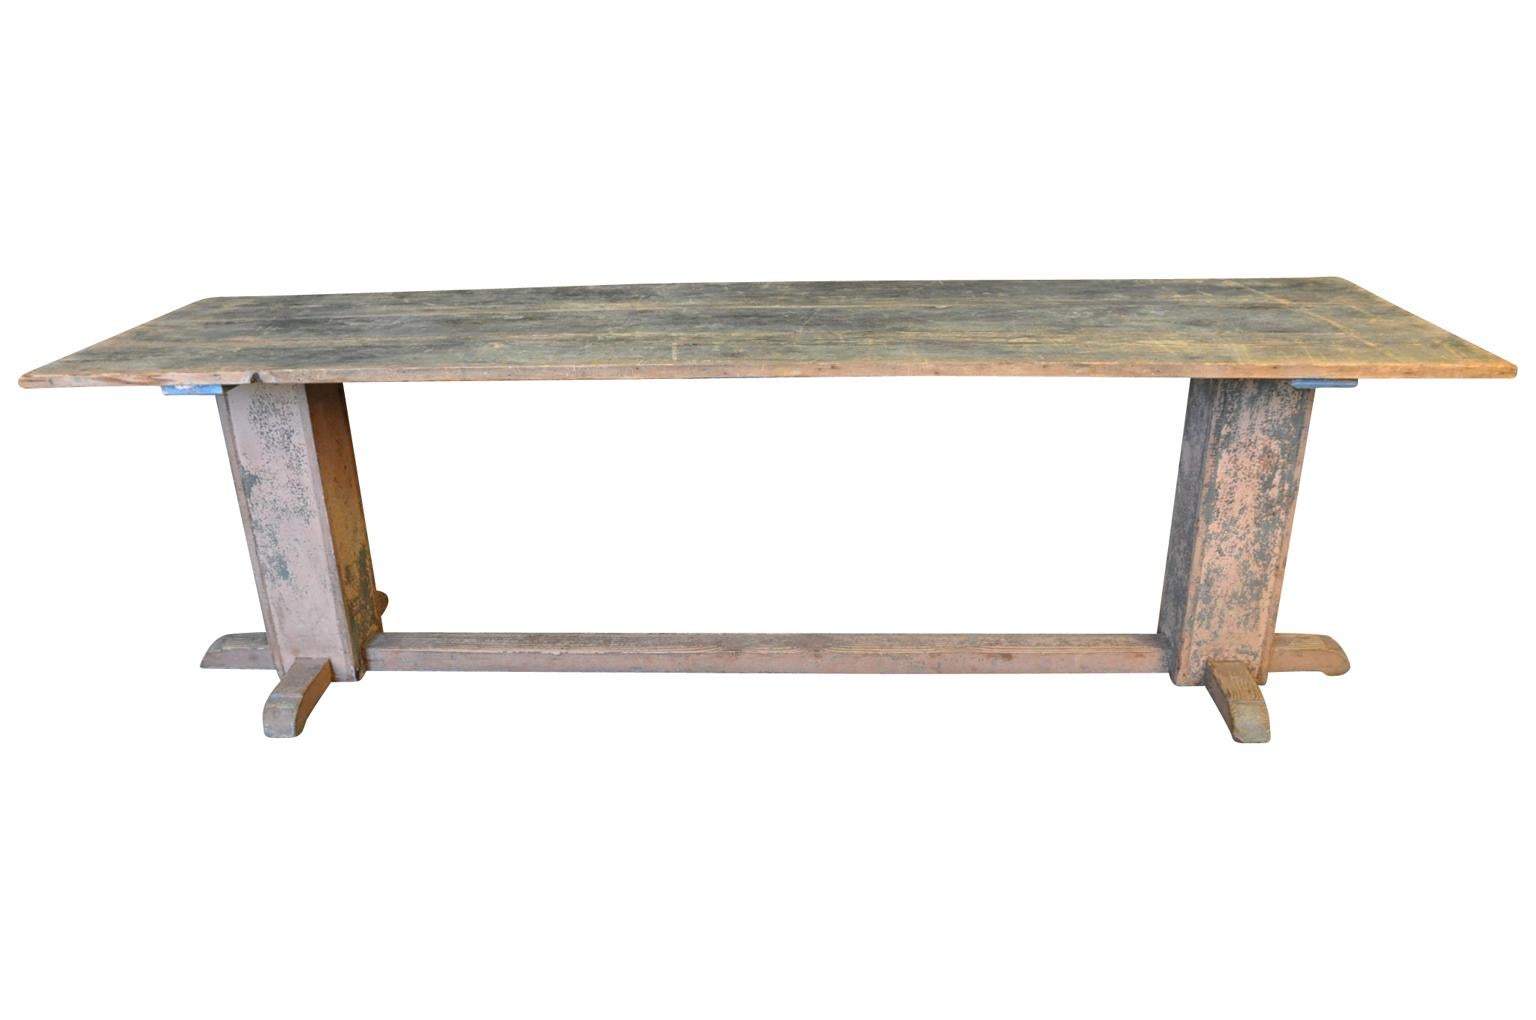 A very handsome later 19th-early 20th century console table in painted pine wood. Very attractive Minimalist lines.